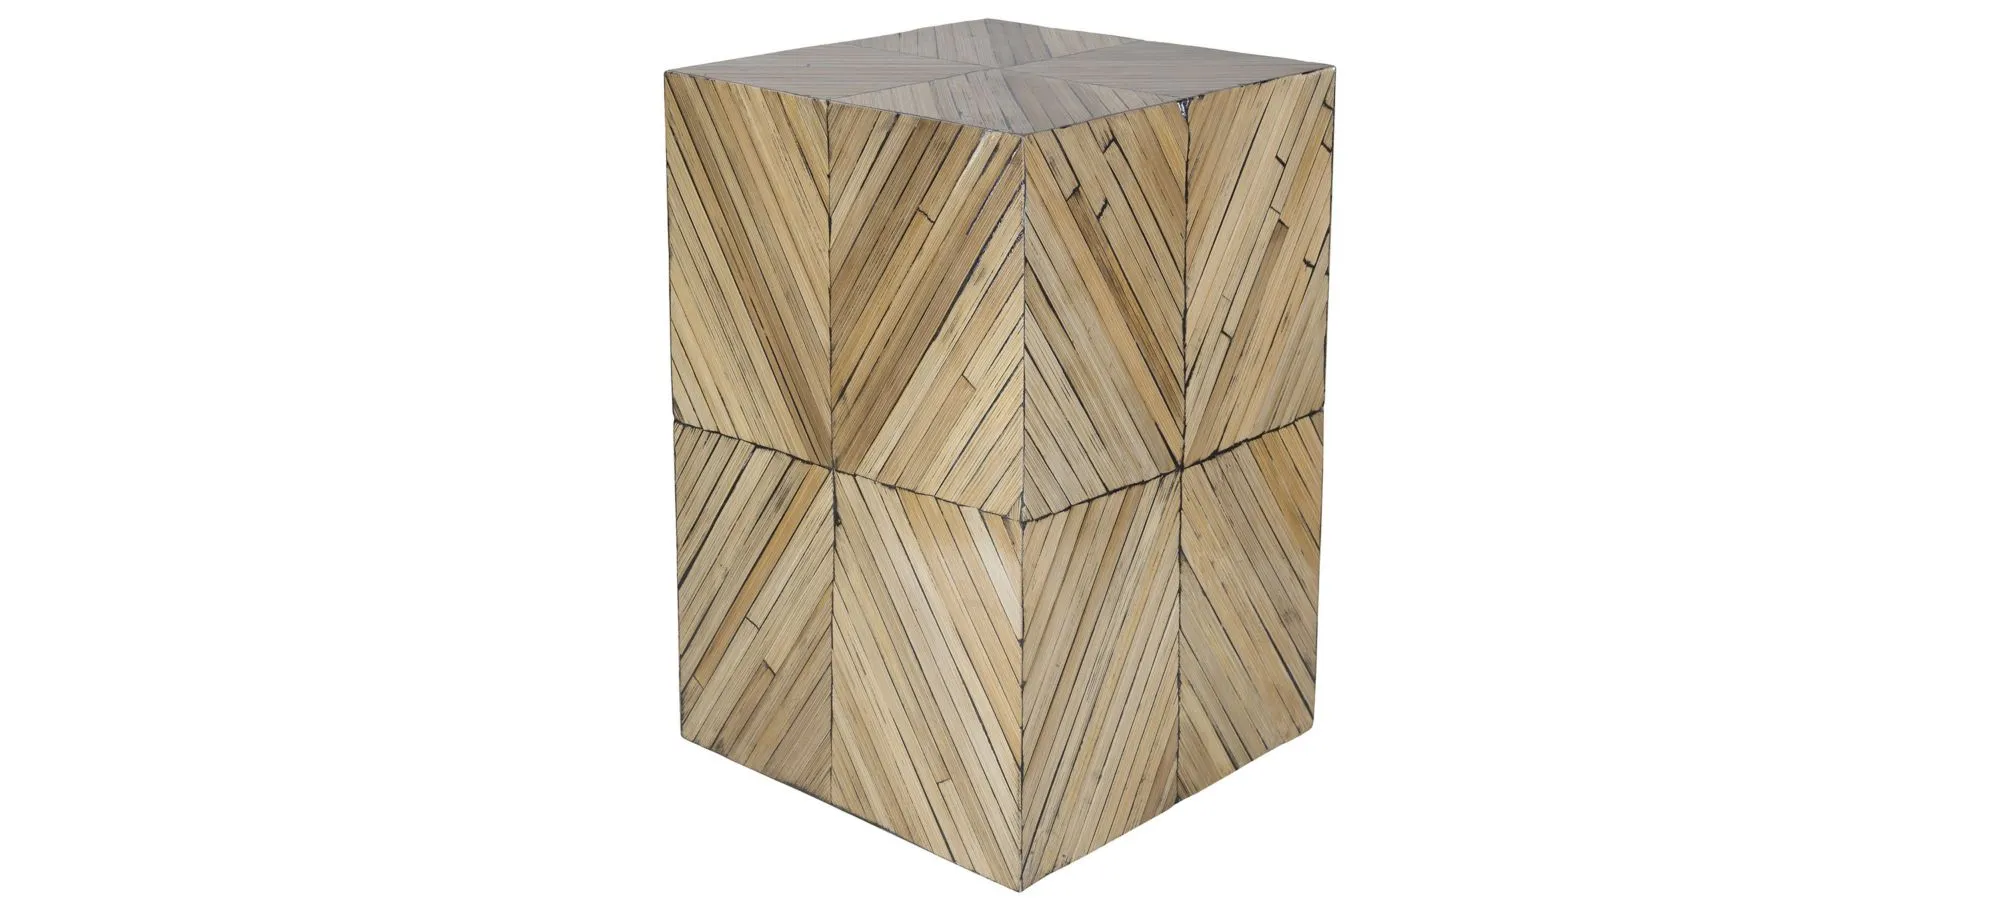 Cane Garden Square End Table in Natural by Surya